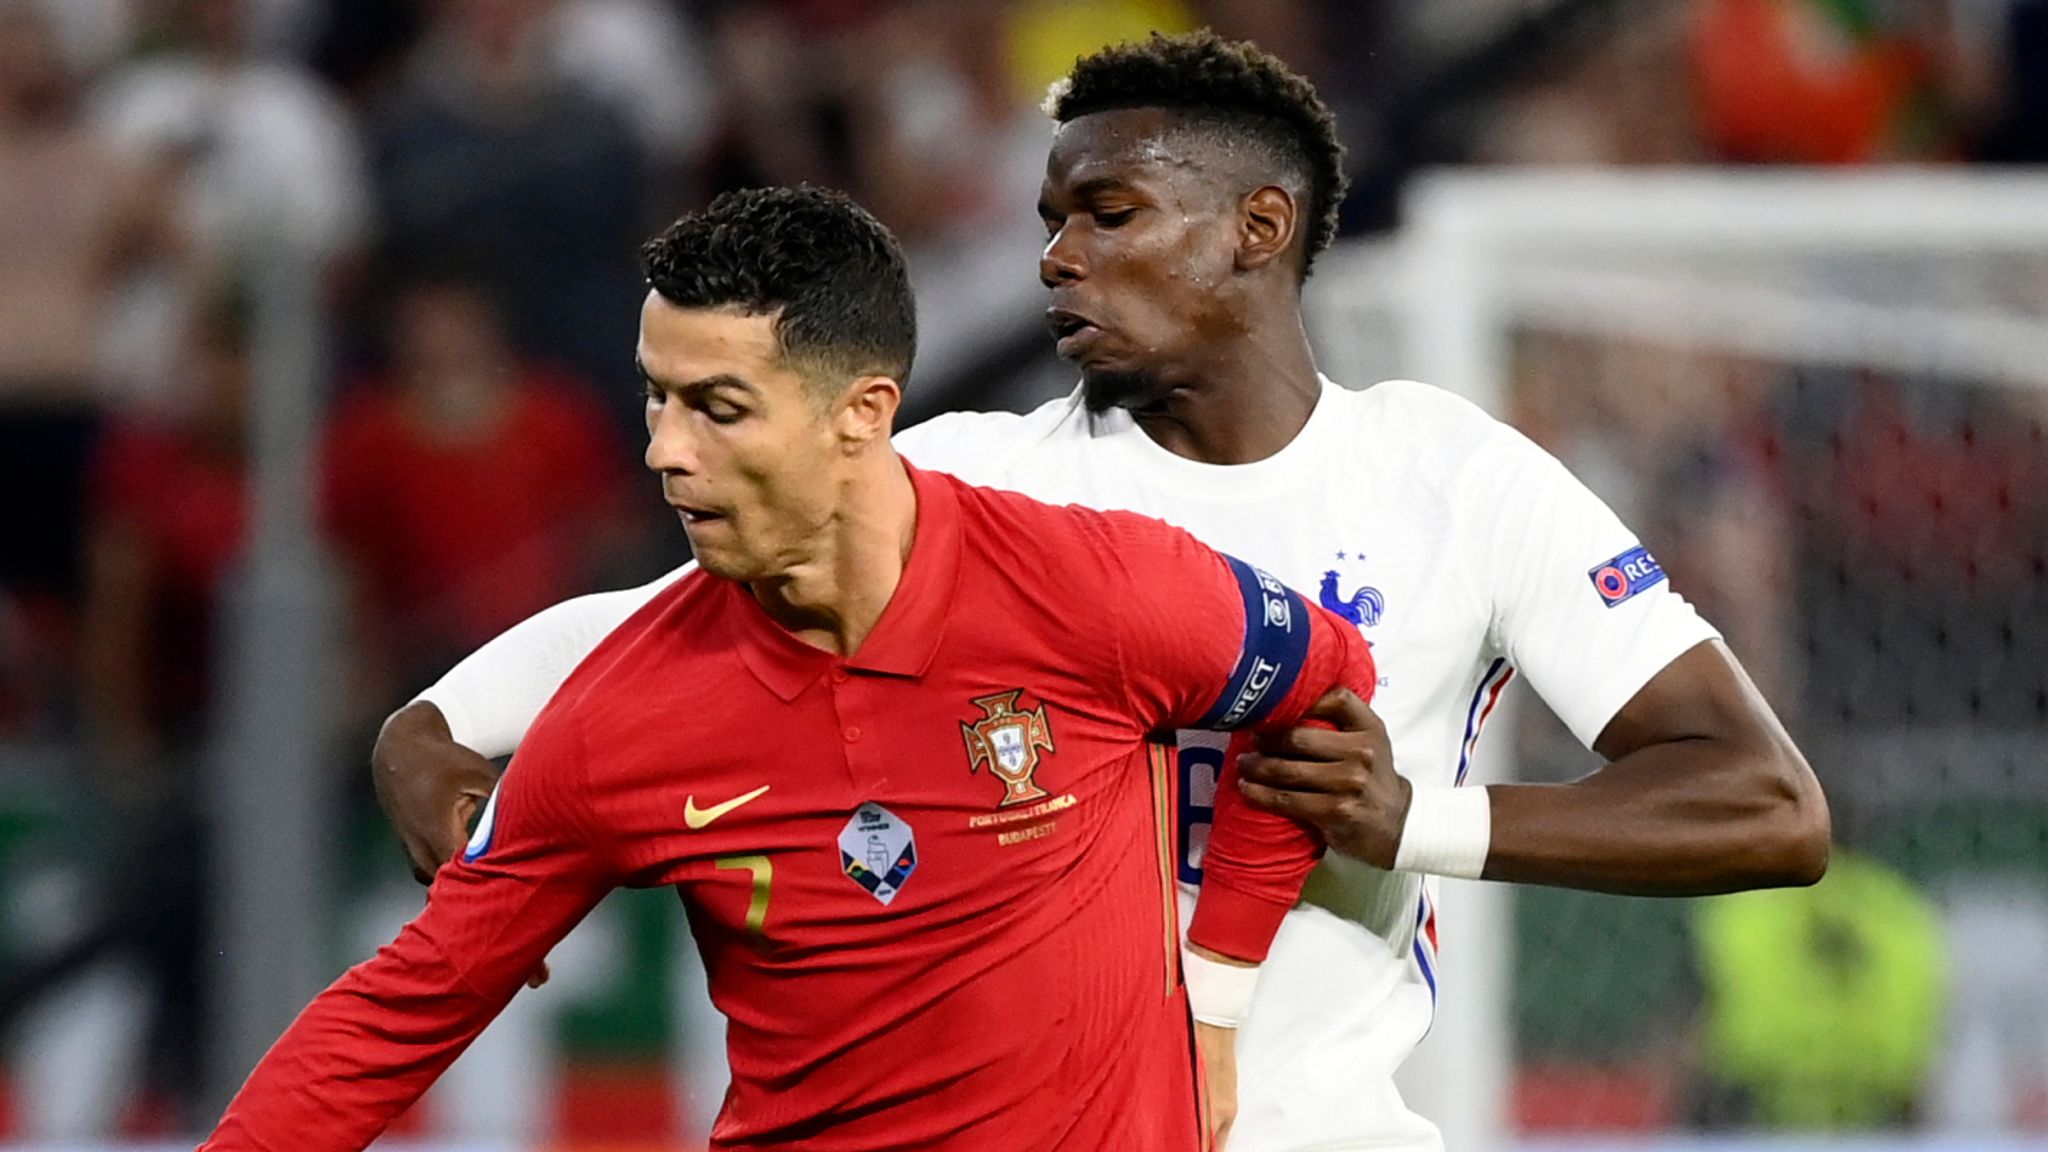 Portugal 2-2 France: Didier Deschamps' side seal top spot in Group F as Portugal get through in third - Football News - Sky Sports